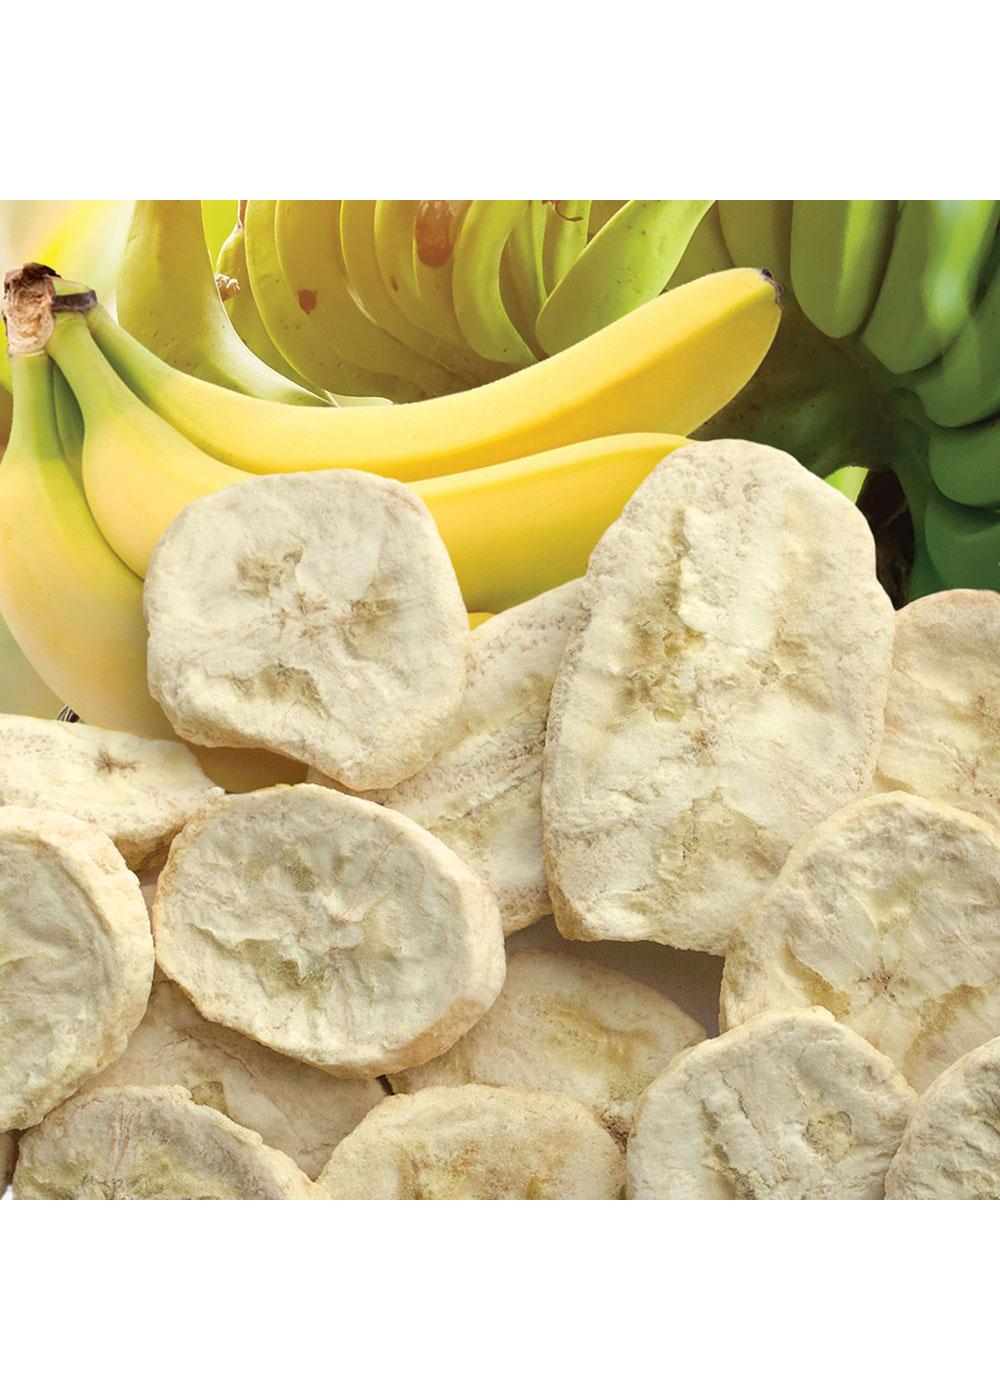 Brothers All Natural Banana Freeze-Dried Fruit Crisps; image 3 of 3